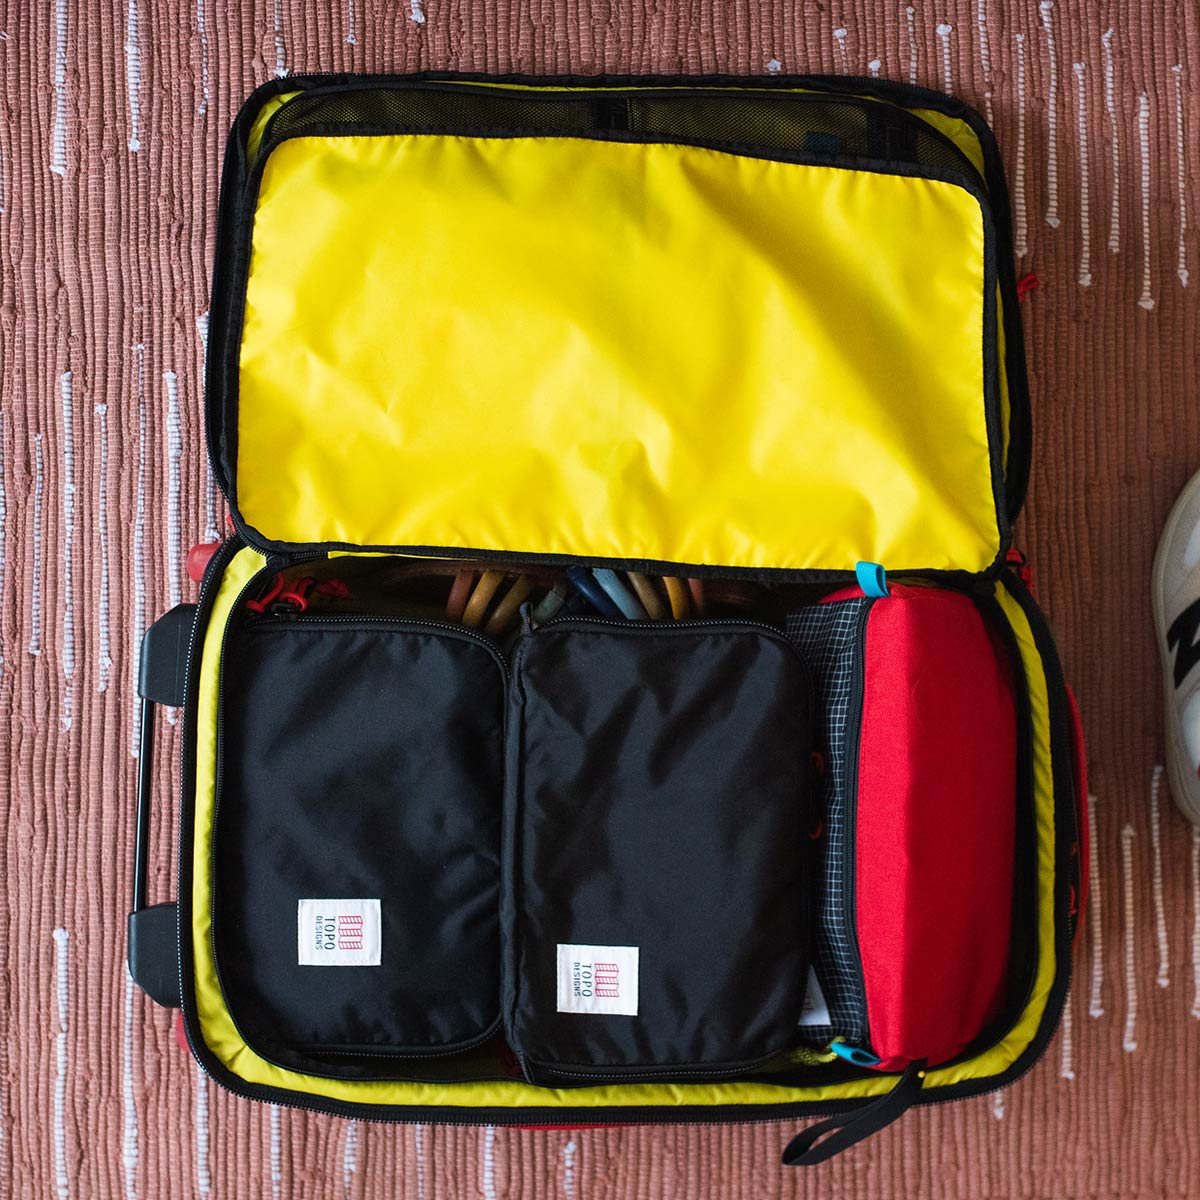 Topo Designs Pack Bag 5L Black, a simple, durable and highly functional way to organize your luggage